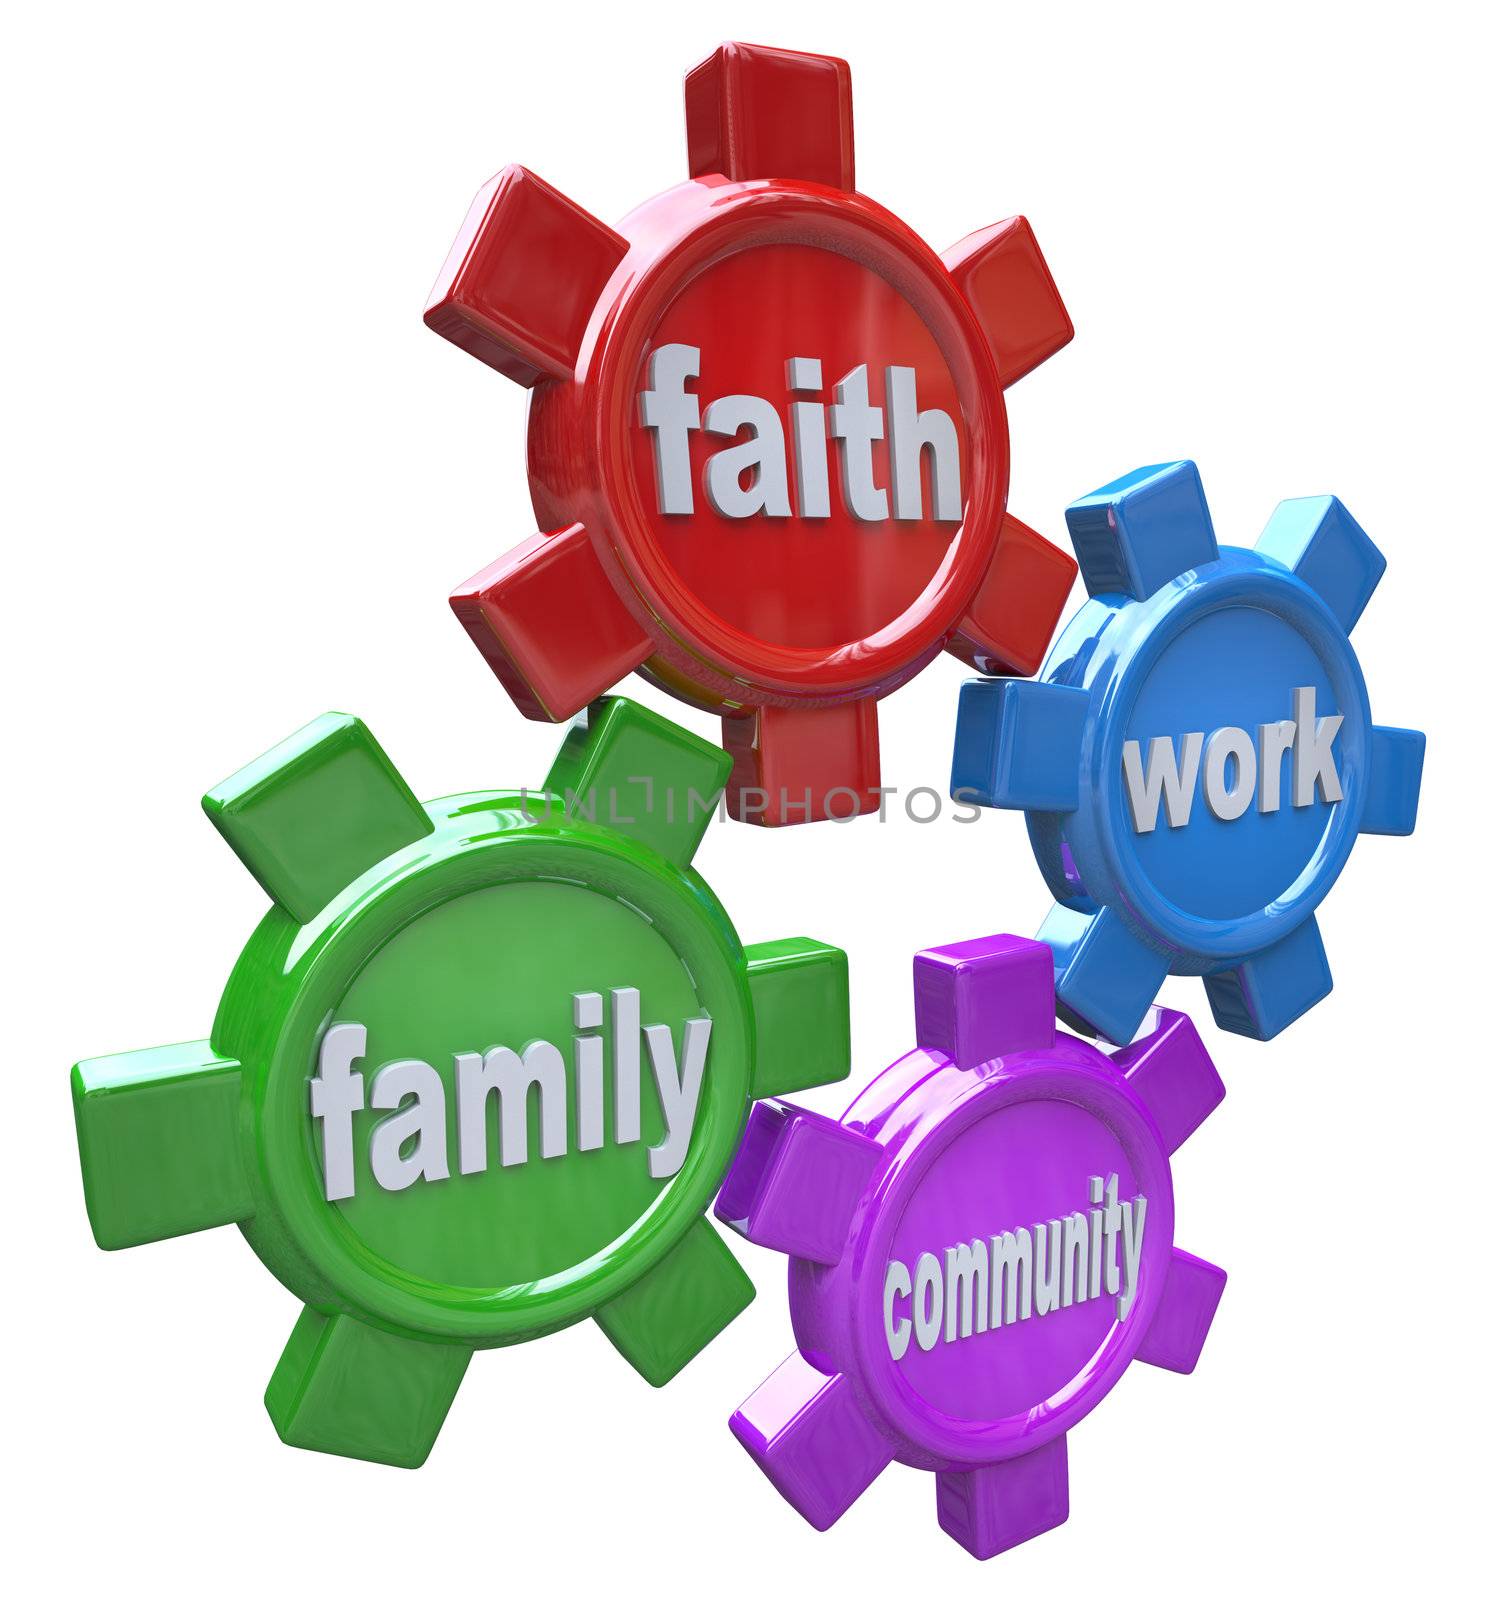 The gears of life marked Faith Family Work and Community turn in harmony